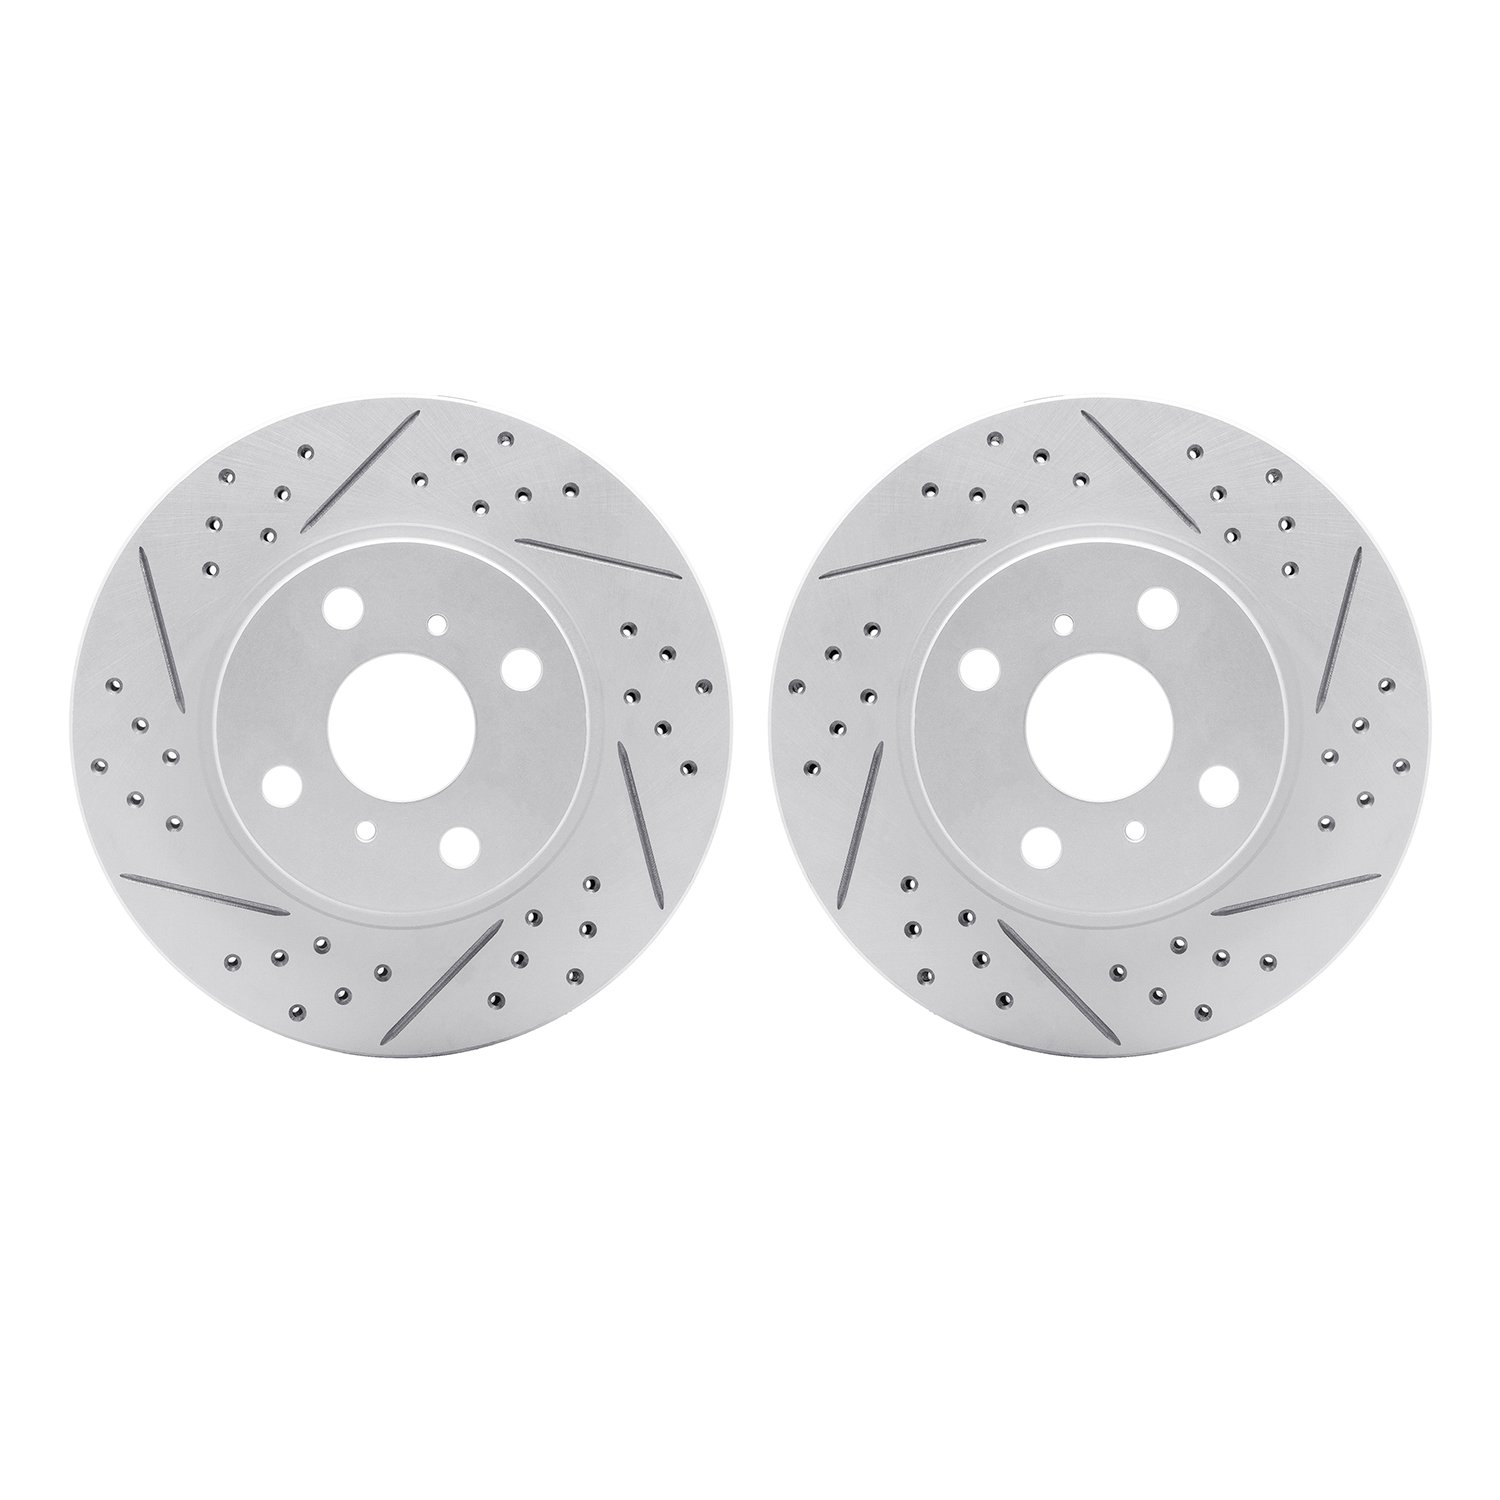 2002-76017 Geoperformance Drilled/Slotted Brake Rotors, 2006-2019 Lexus/Toyota/Scion, Position: Front